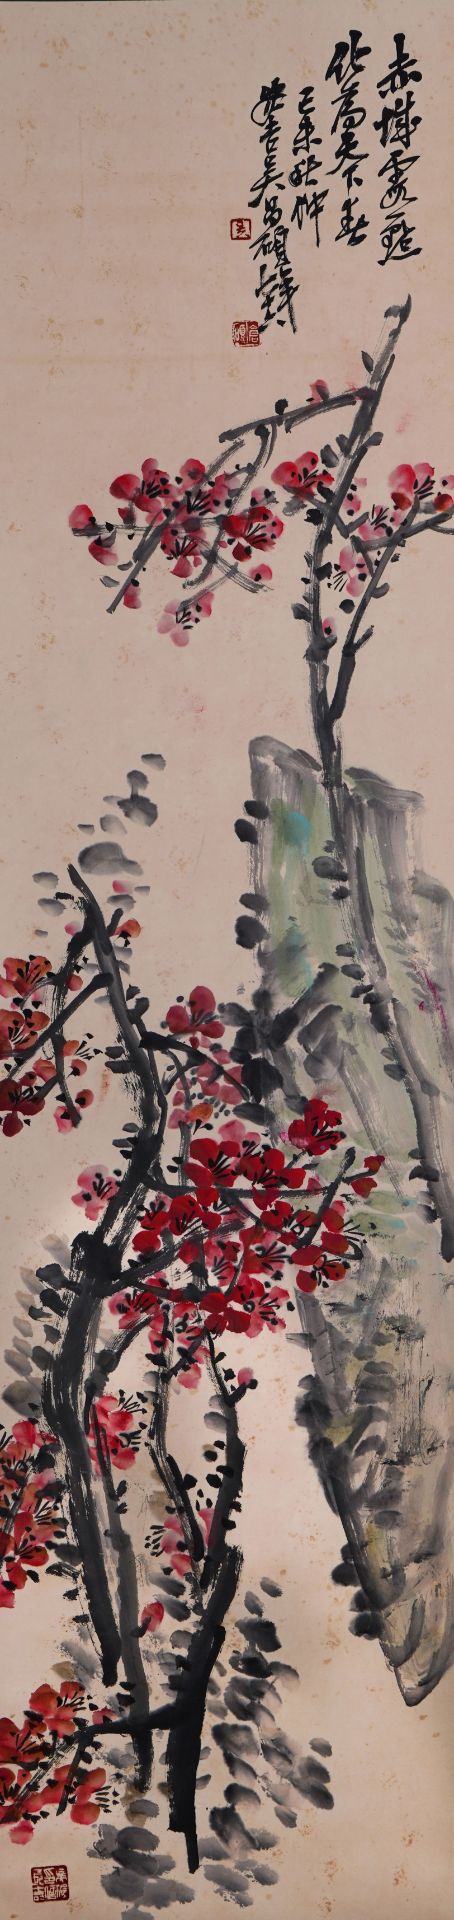 A Chinese Scroll Painting by Wu Changshuo - Bild 22 aus 27